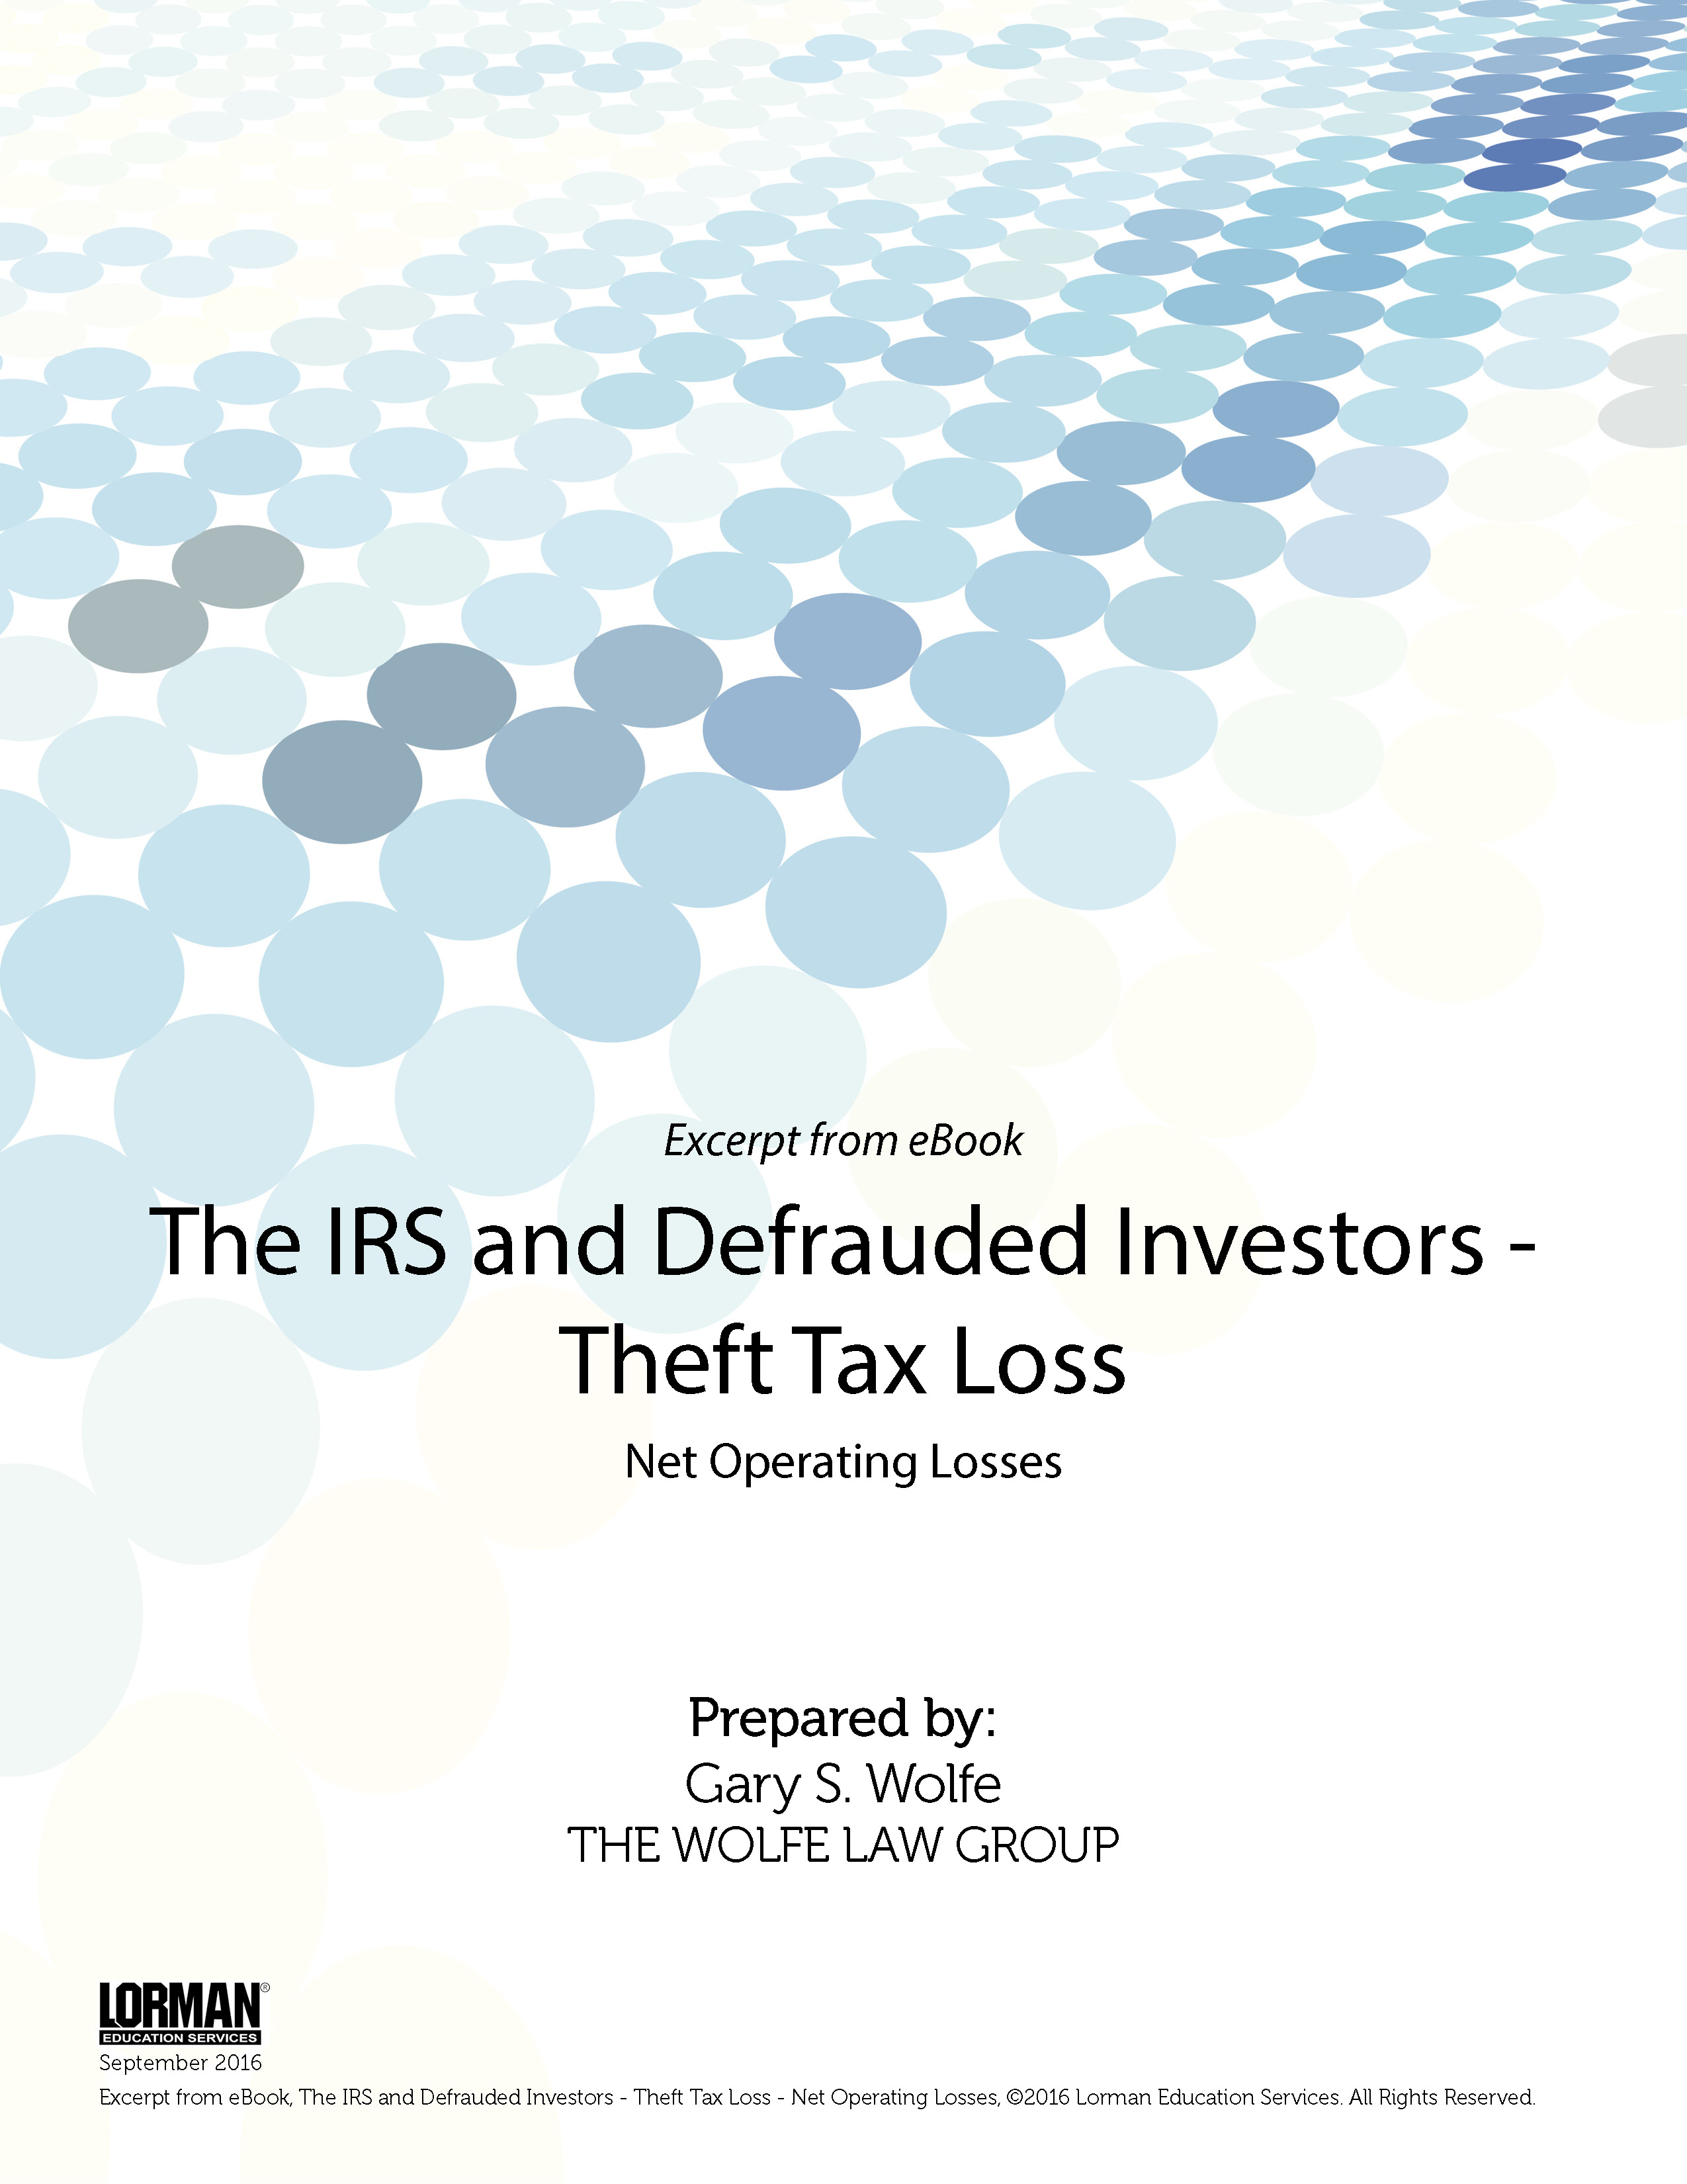 The IRS and Defrauded Investors: Theft Tax Loss - Net Operating Losses